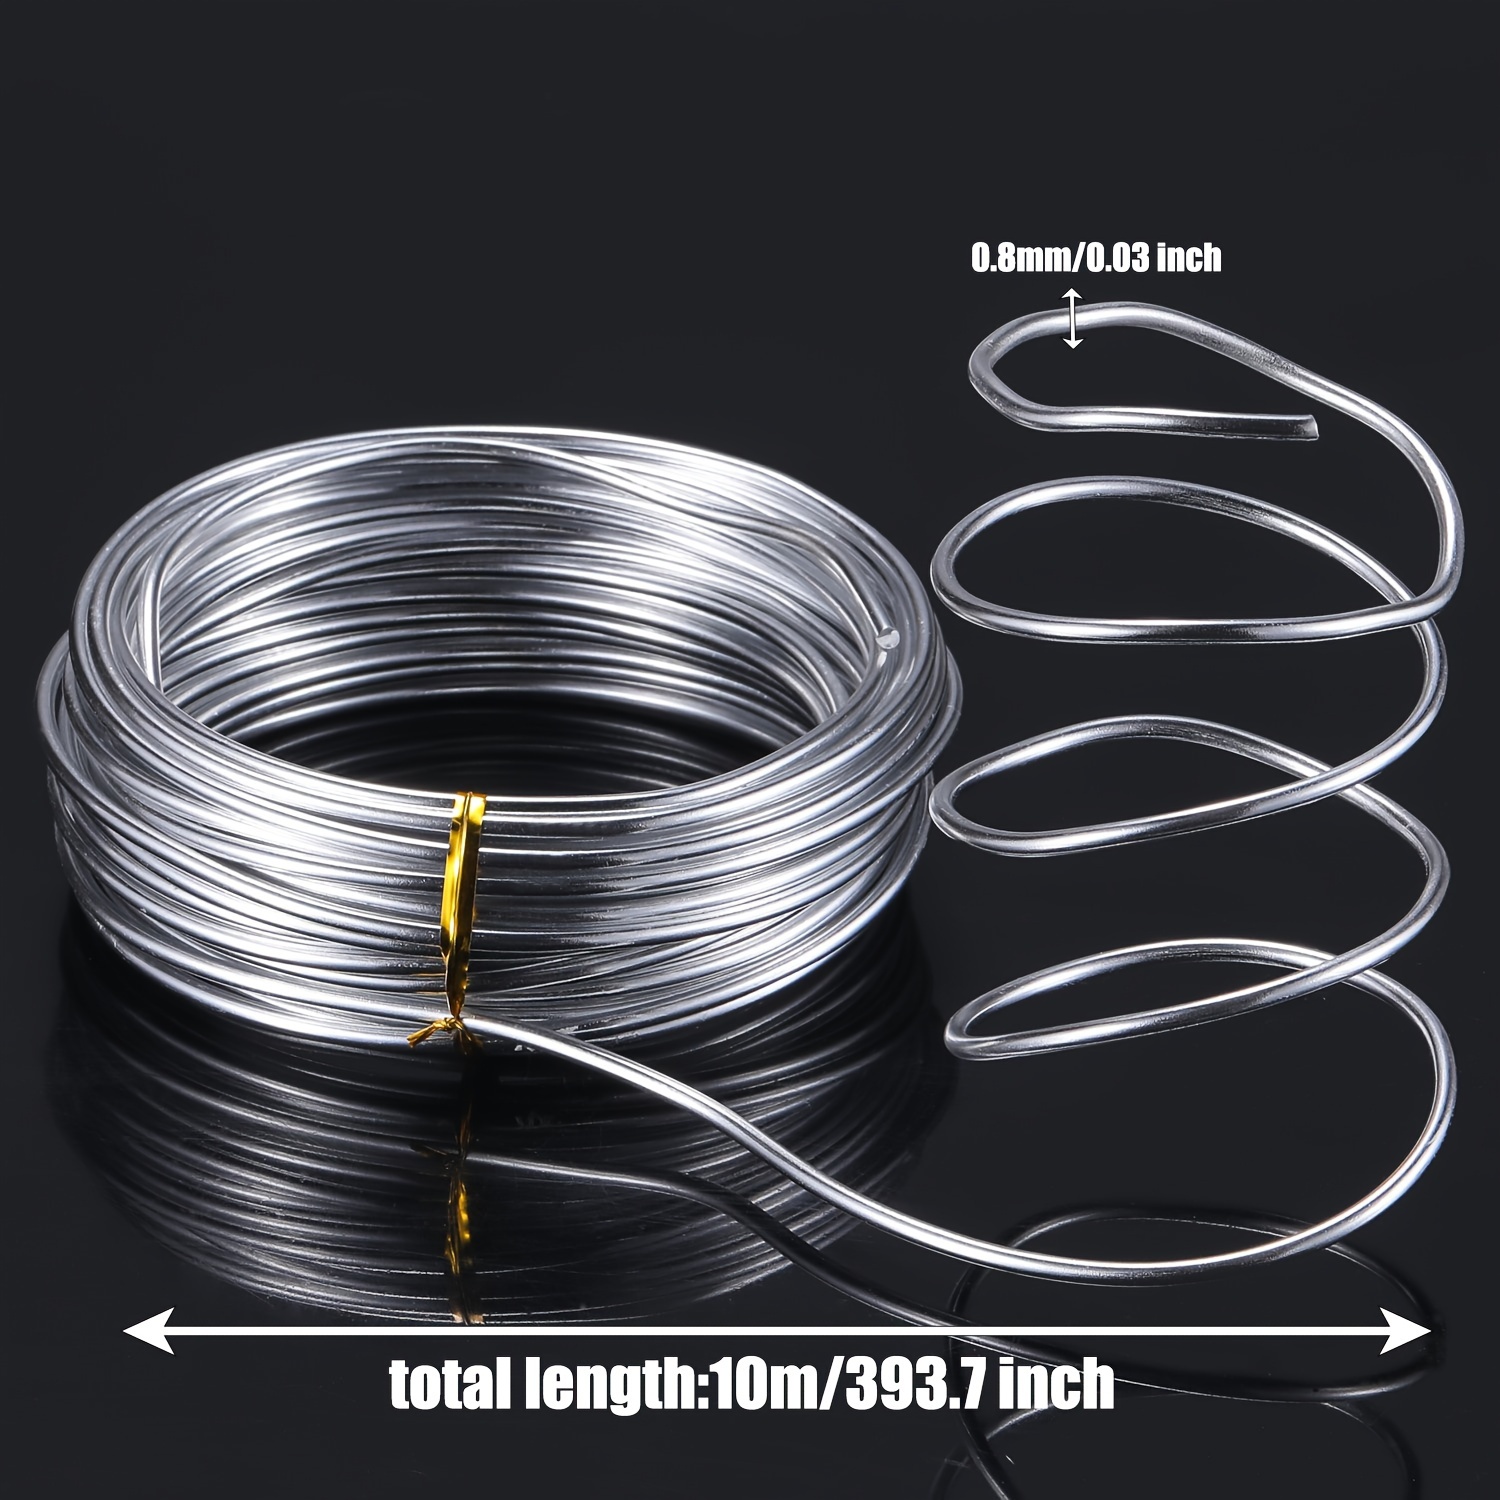 Tenn Well 9 Gauge Aluminum Wire, 50 Feet 3mm Bendable Metal Craft Wire for  Sculpting, Armature Making, Jewelry Making, Wire Weaving and Wrapping